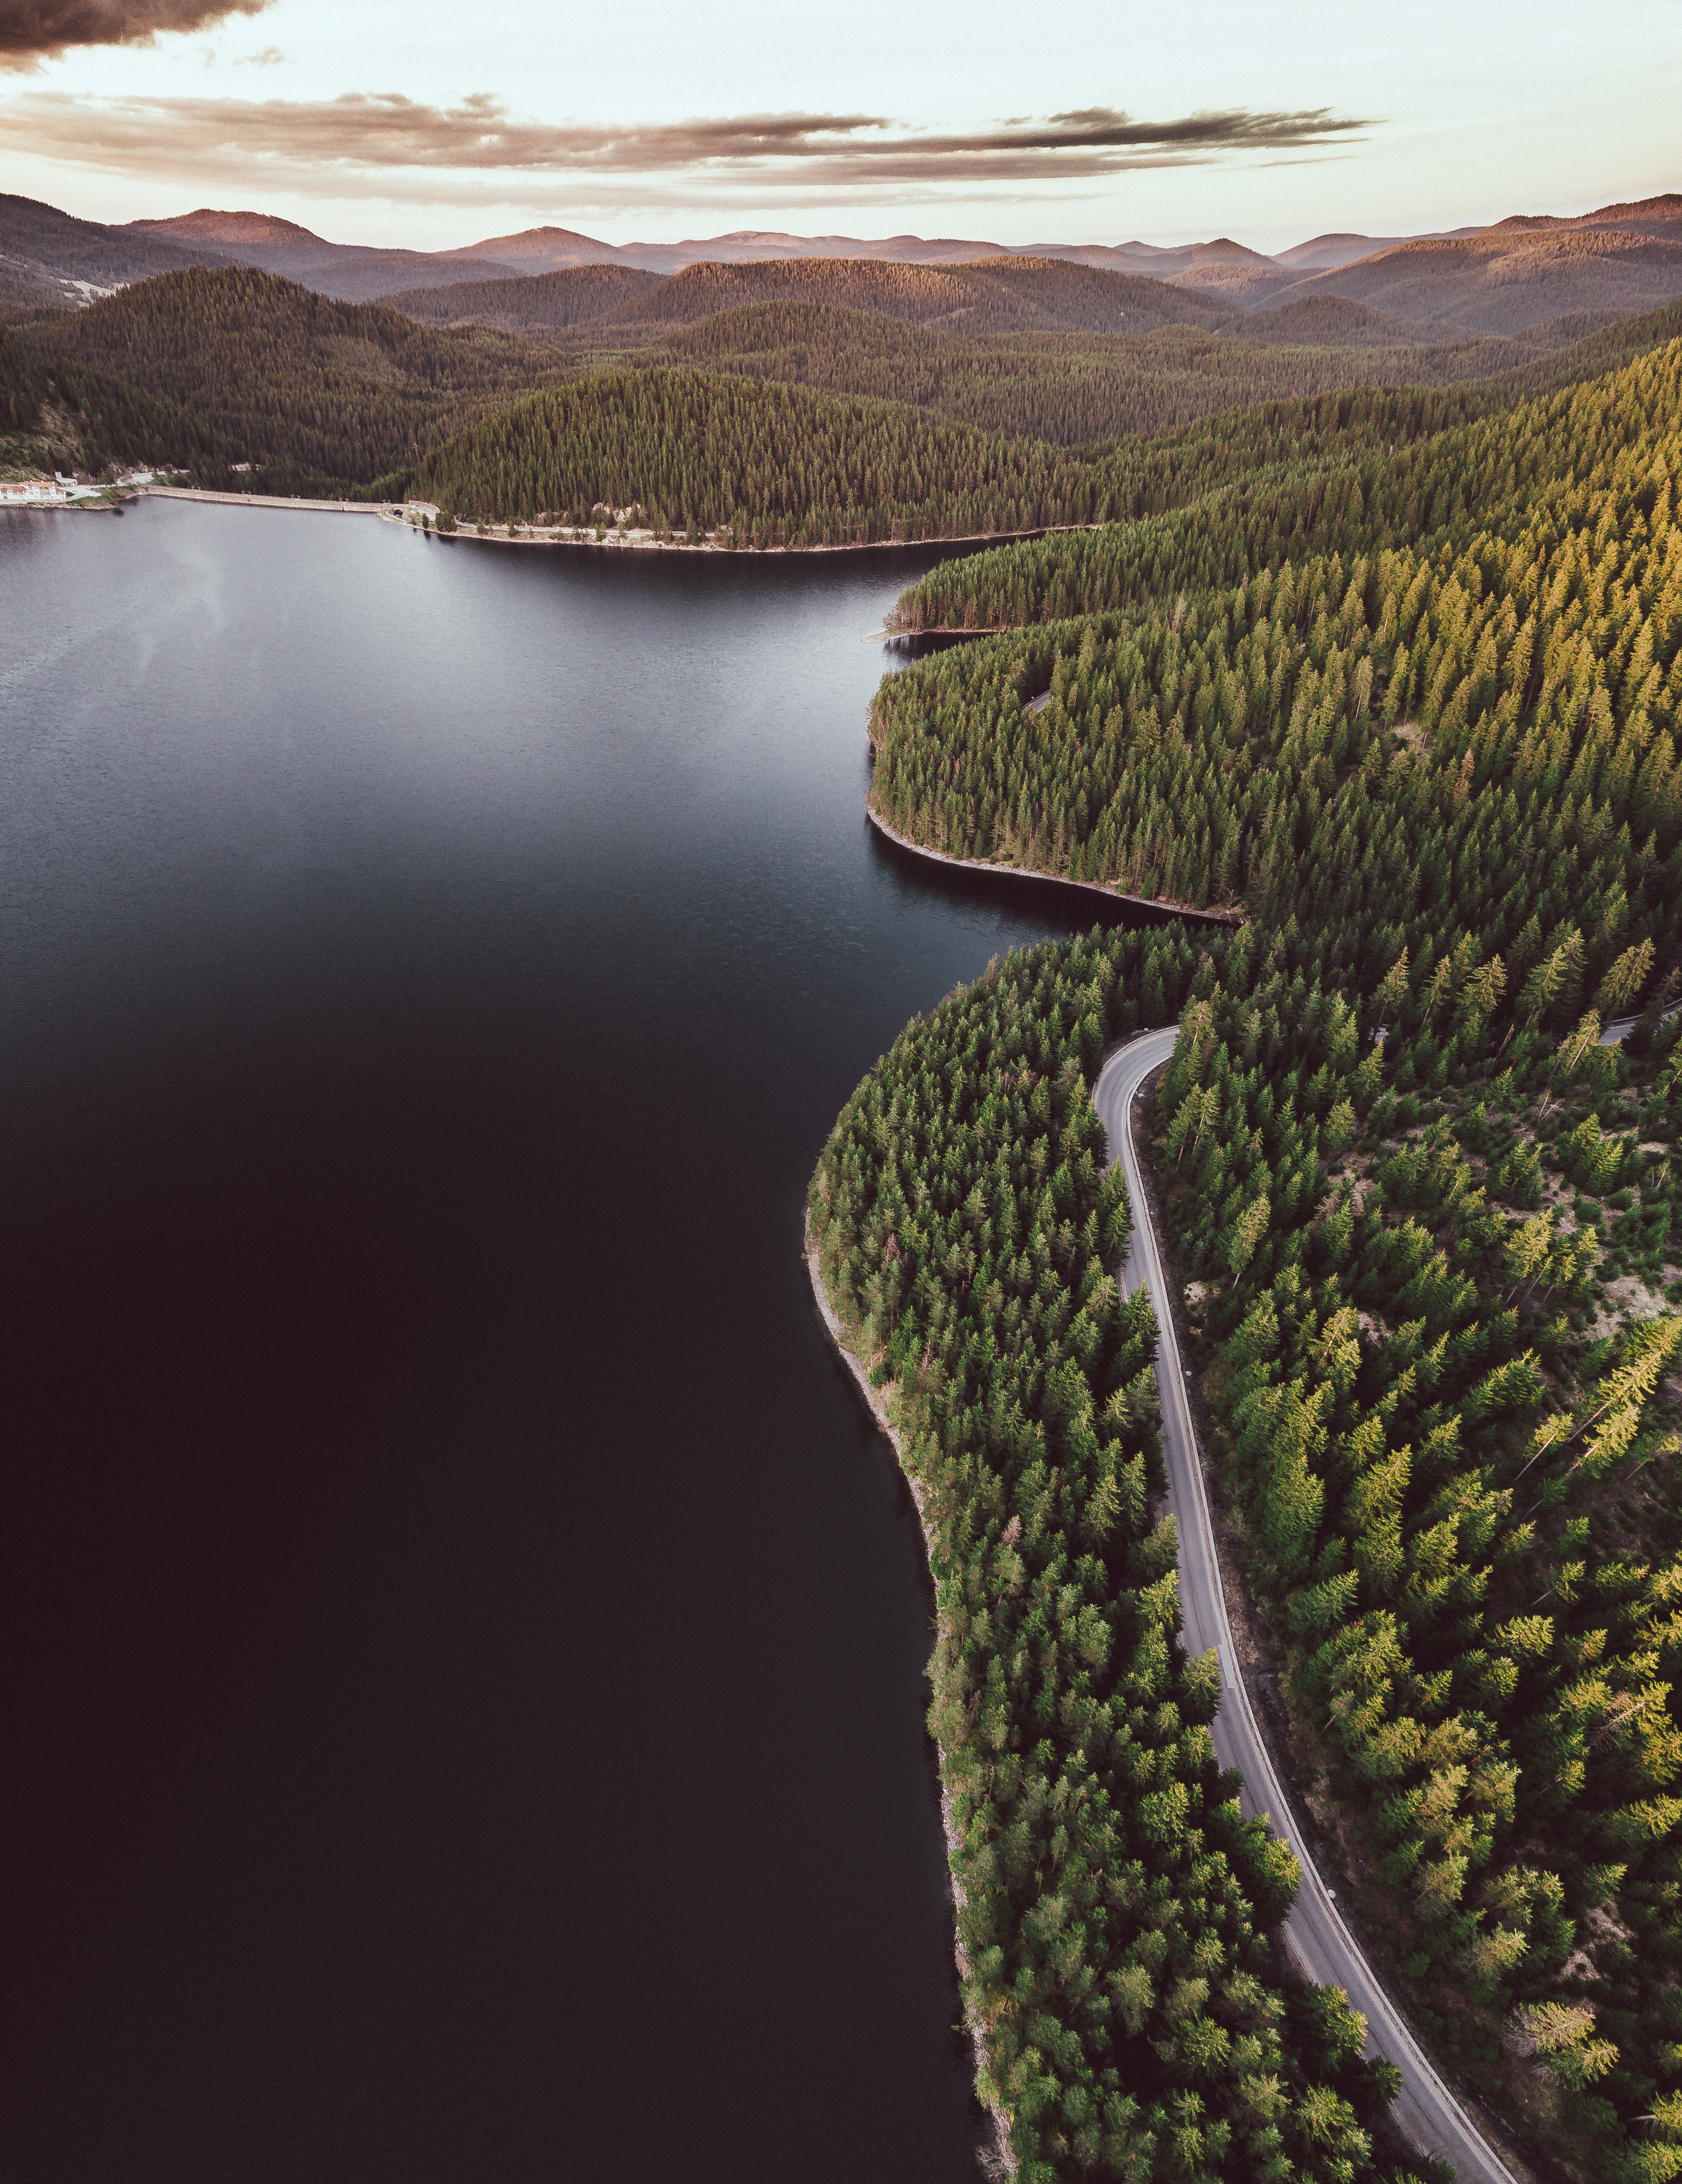 shore, nature, view from above, lake, bank, road, forest, hills lock screen backgrounds